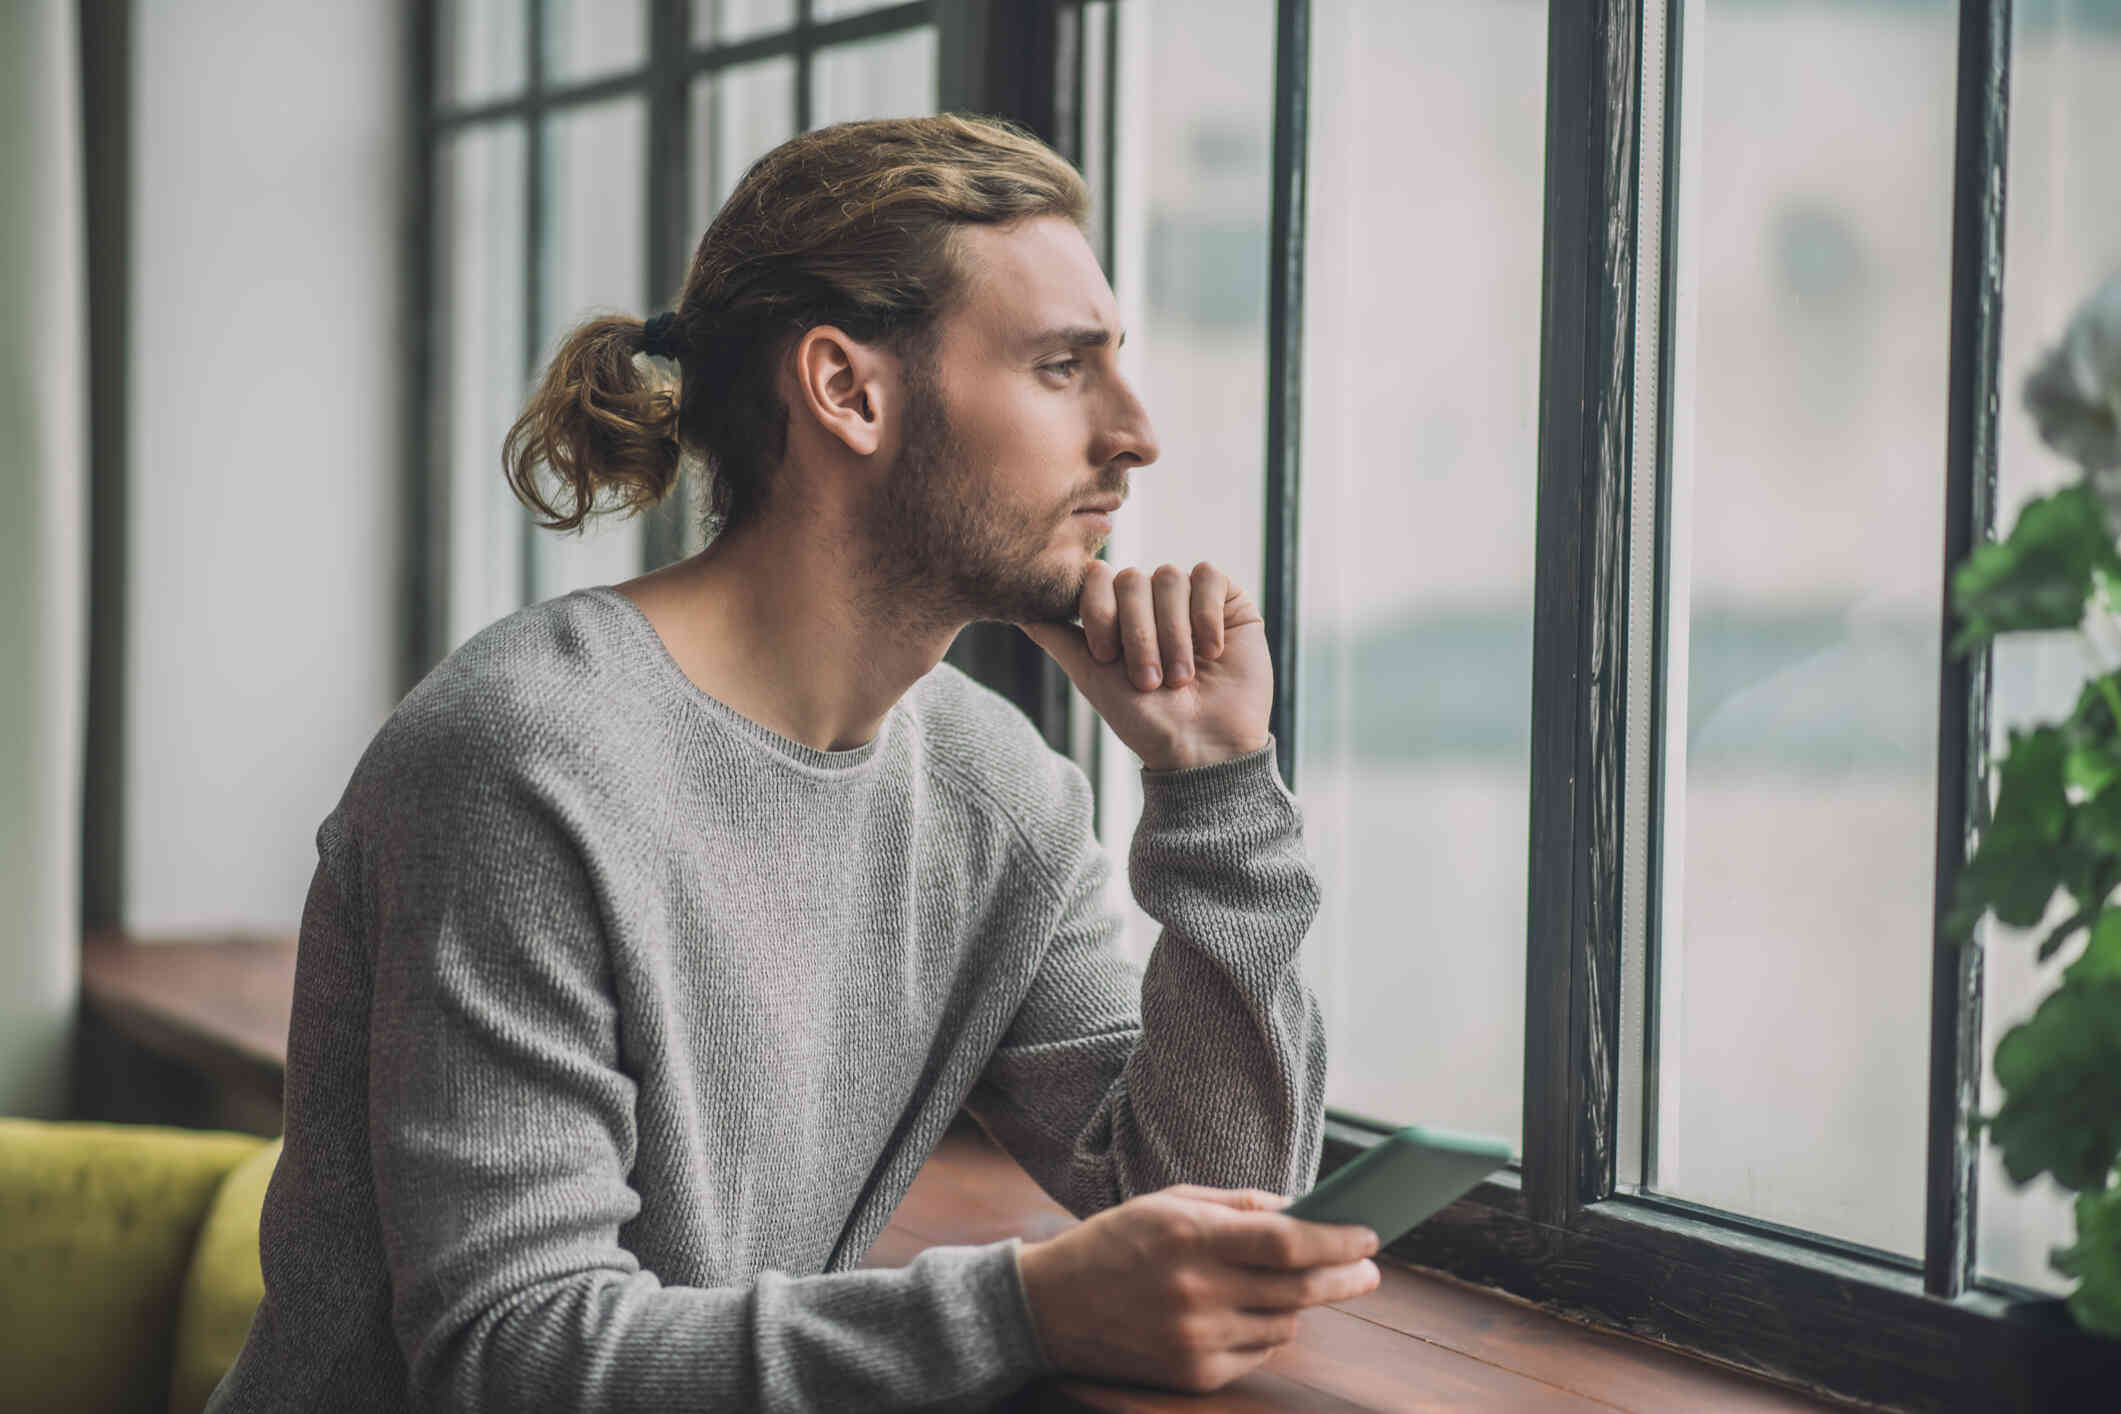 A man in a grey longsleeve shirt sits near a window with his phone in his hand as he gazes out sadly.